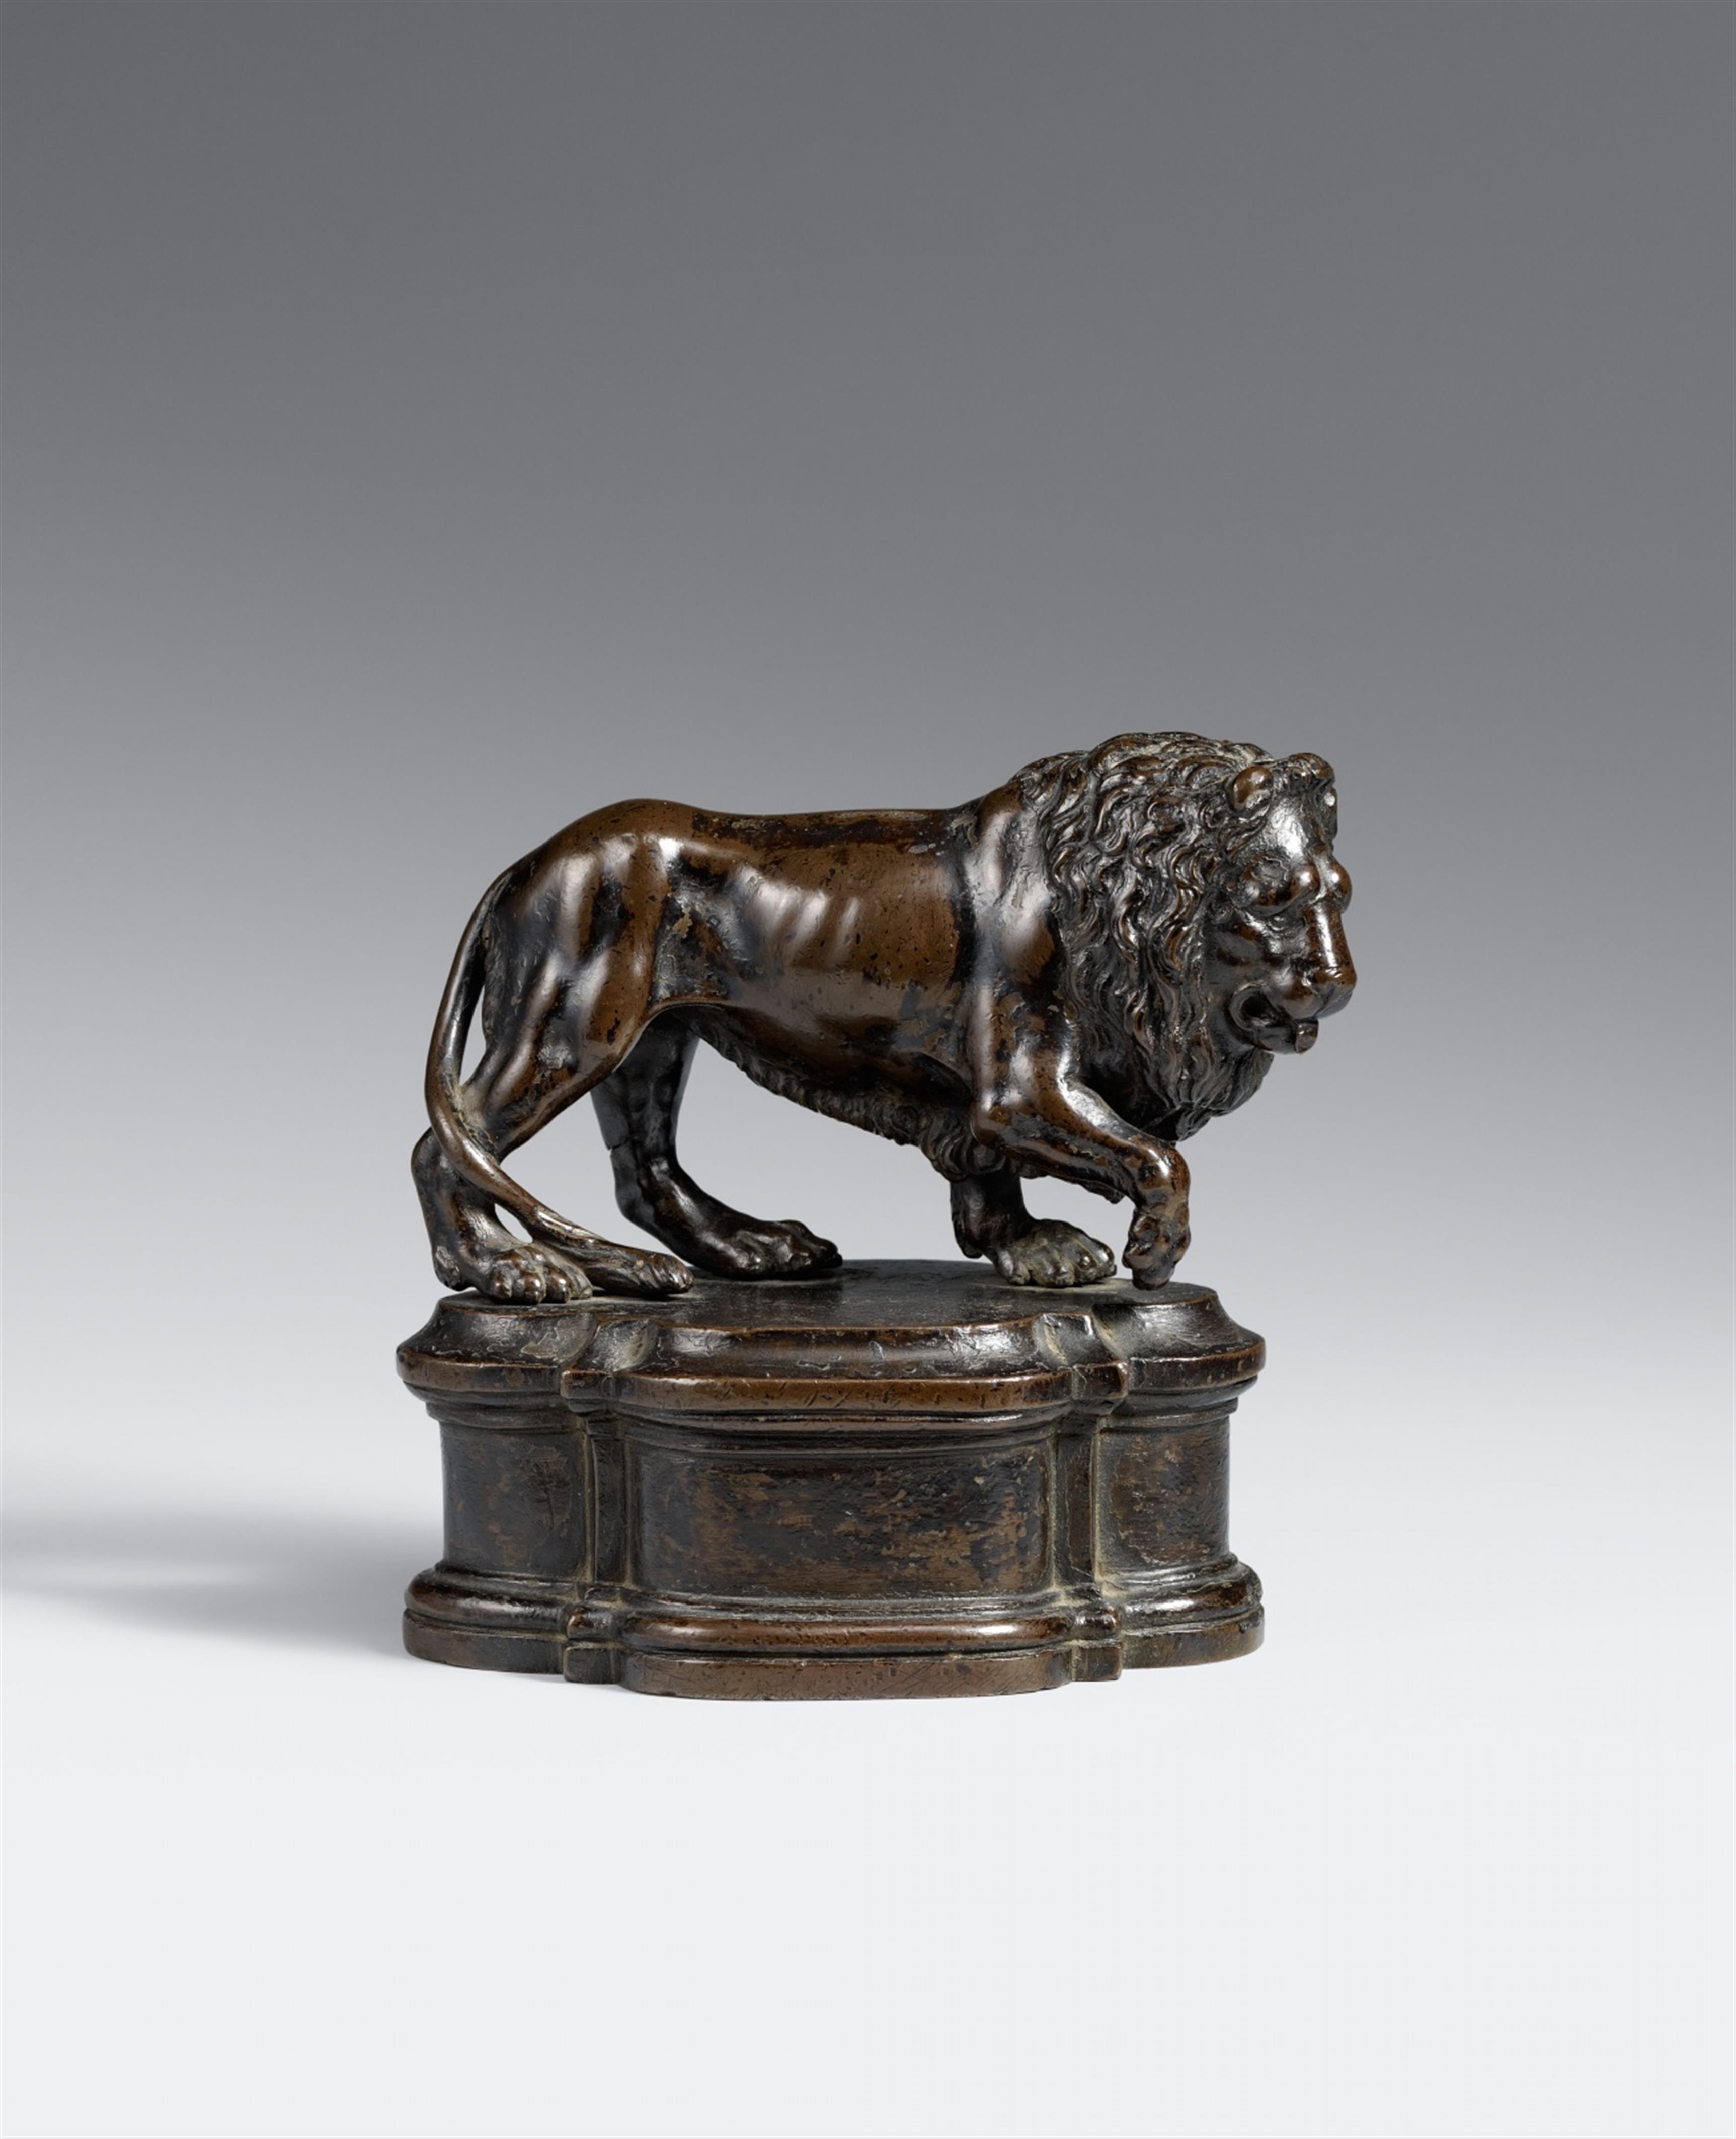 Northern Italy 17th century - A 17th century North Italian bronze figure of a striding lion - image-1